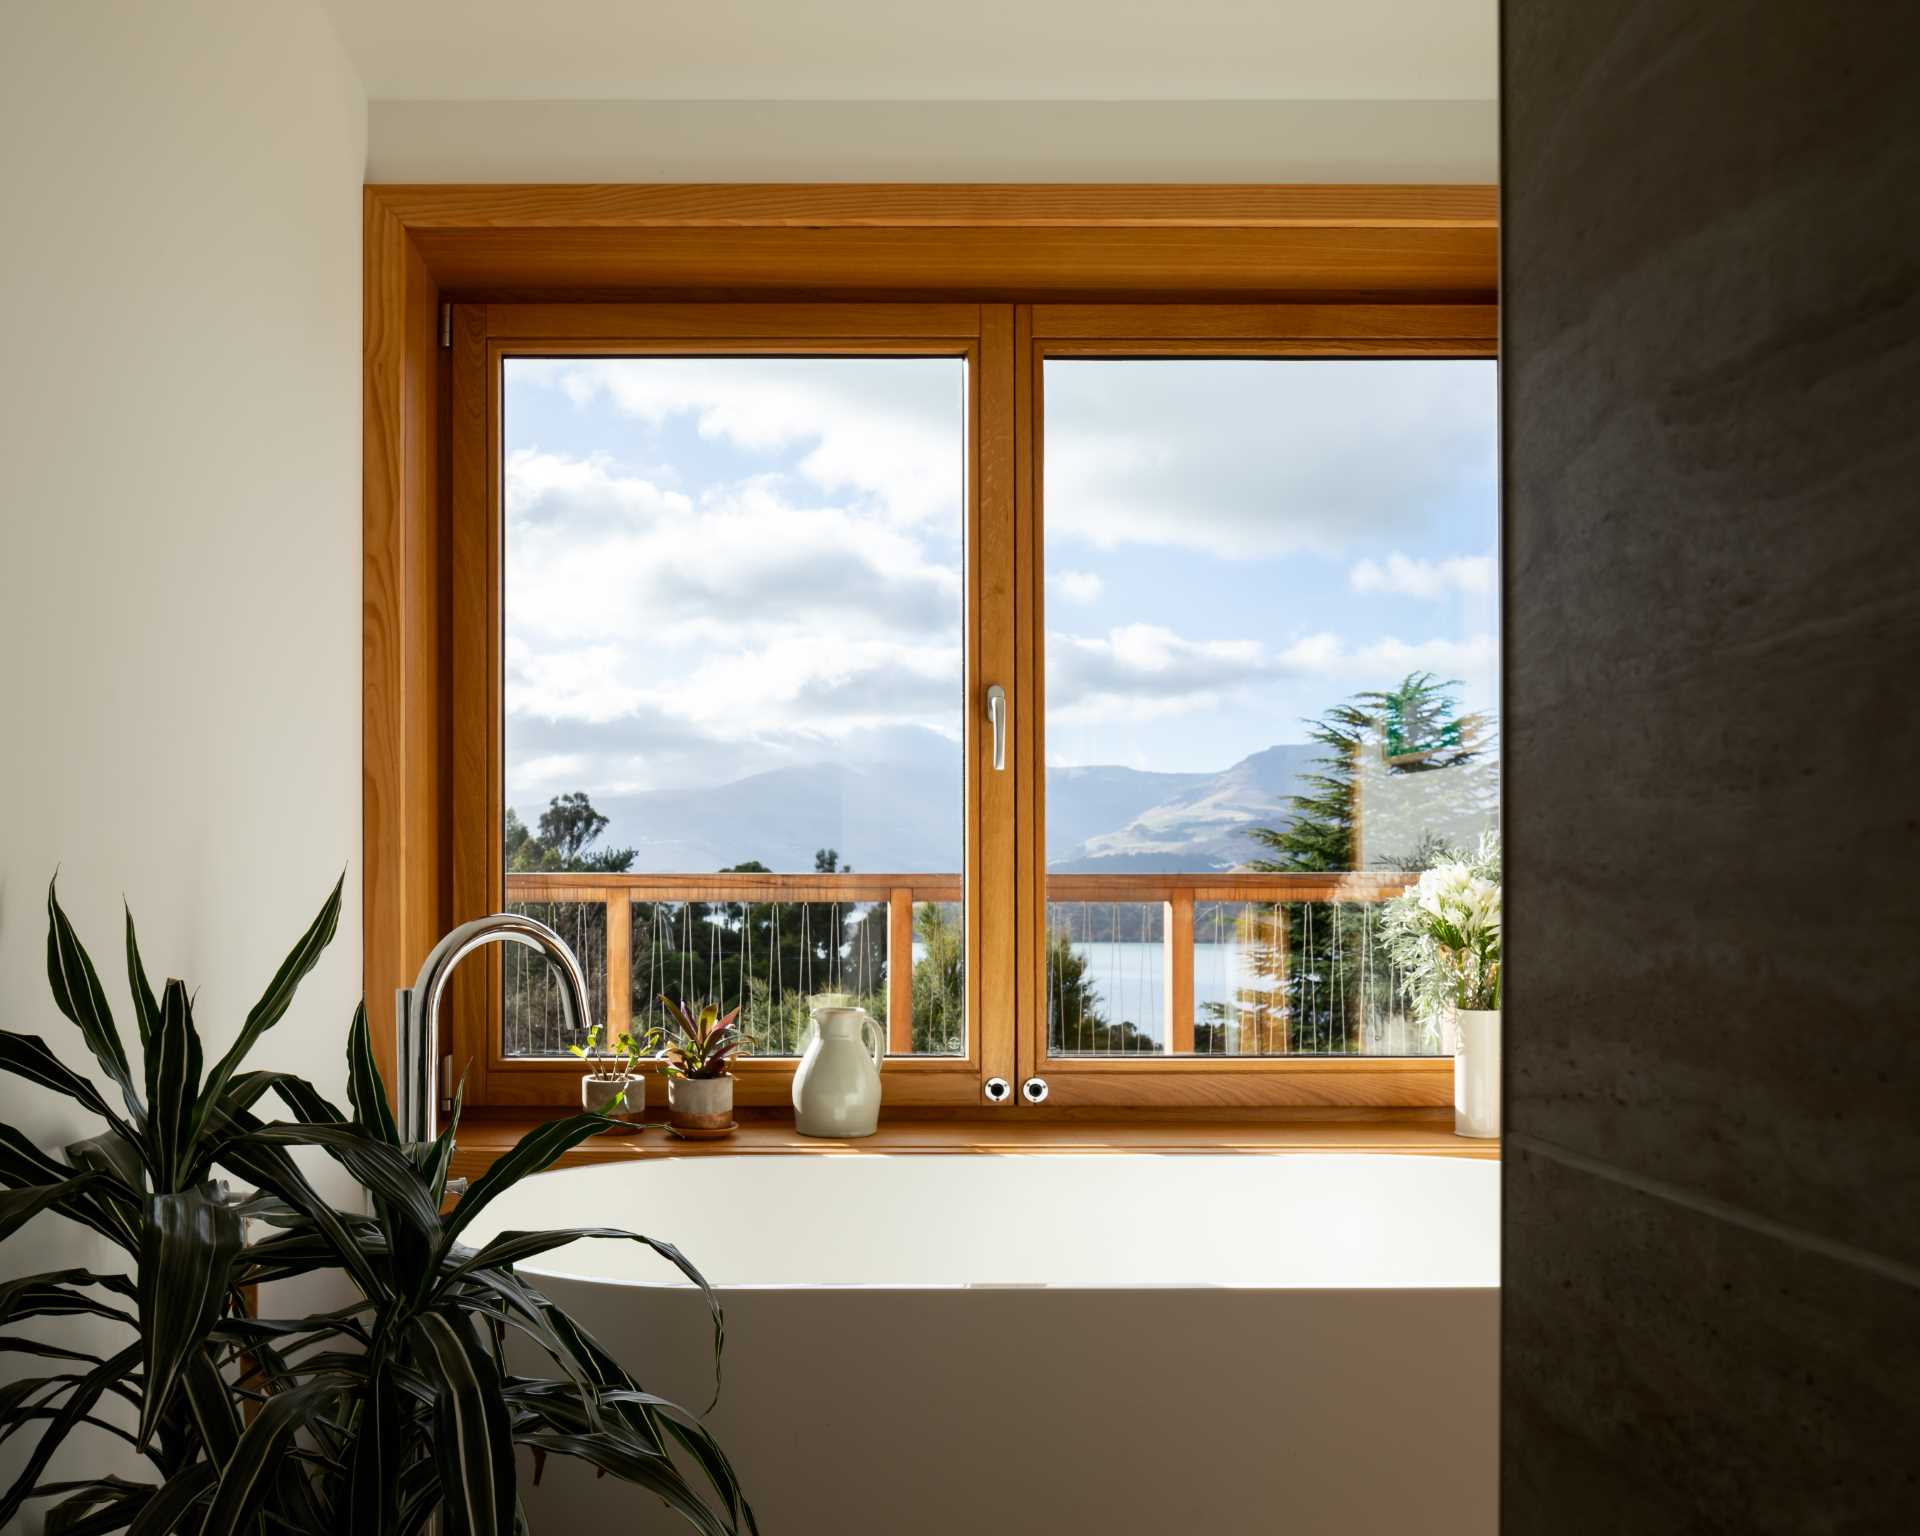 This modern bathroom has a white bathtub positioned under the windows to take advantage of the views.